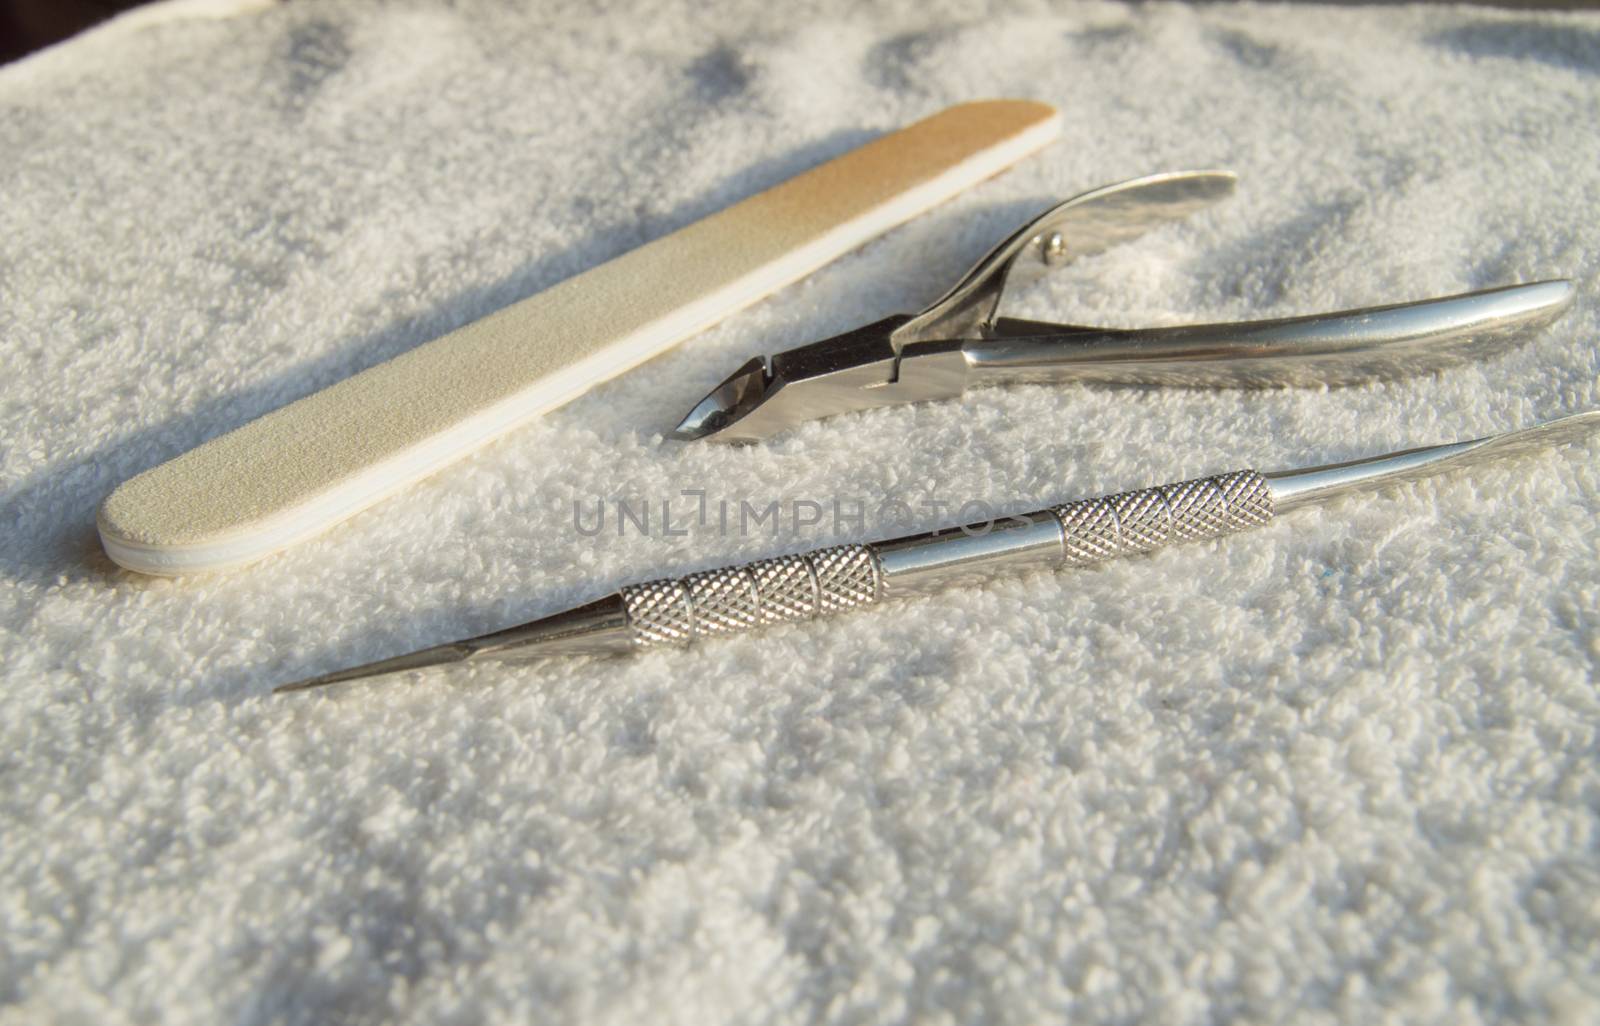 Tools of a manicure set on white background, concept of care of nails and cuticles.